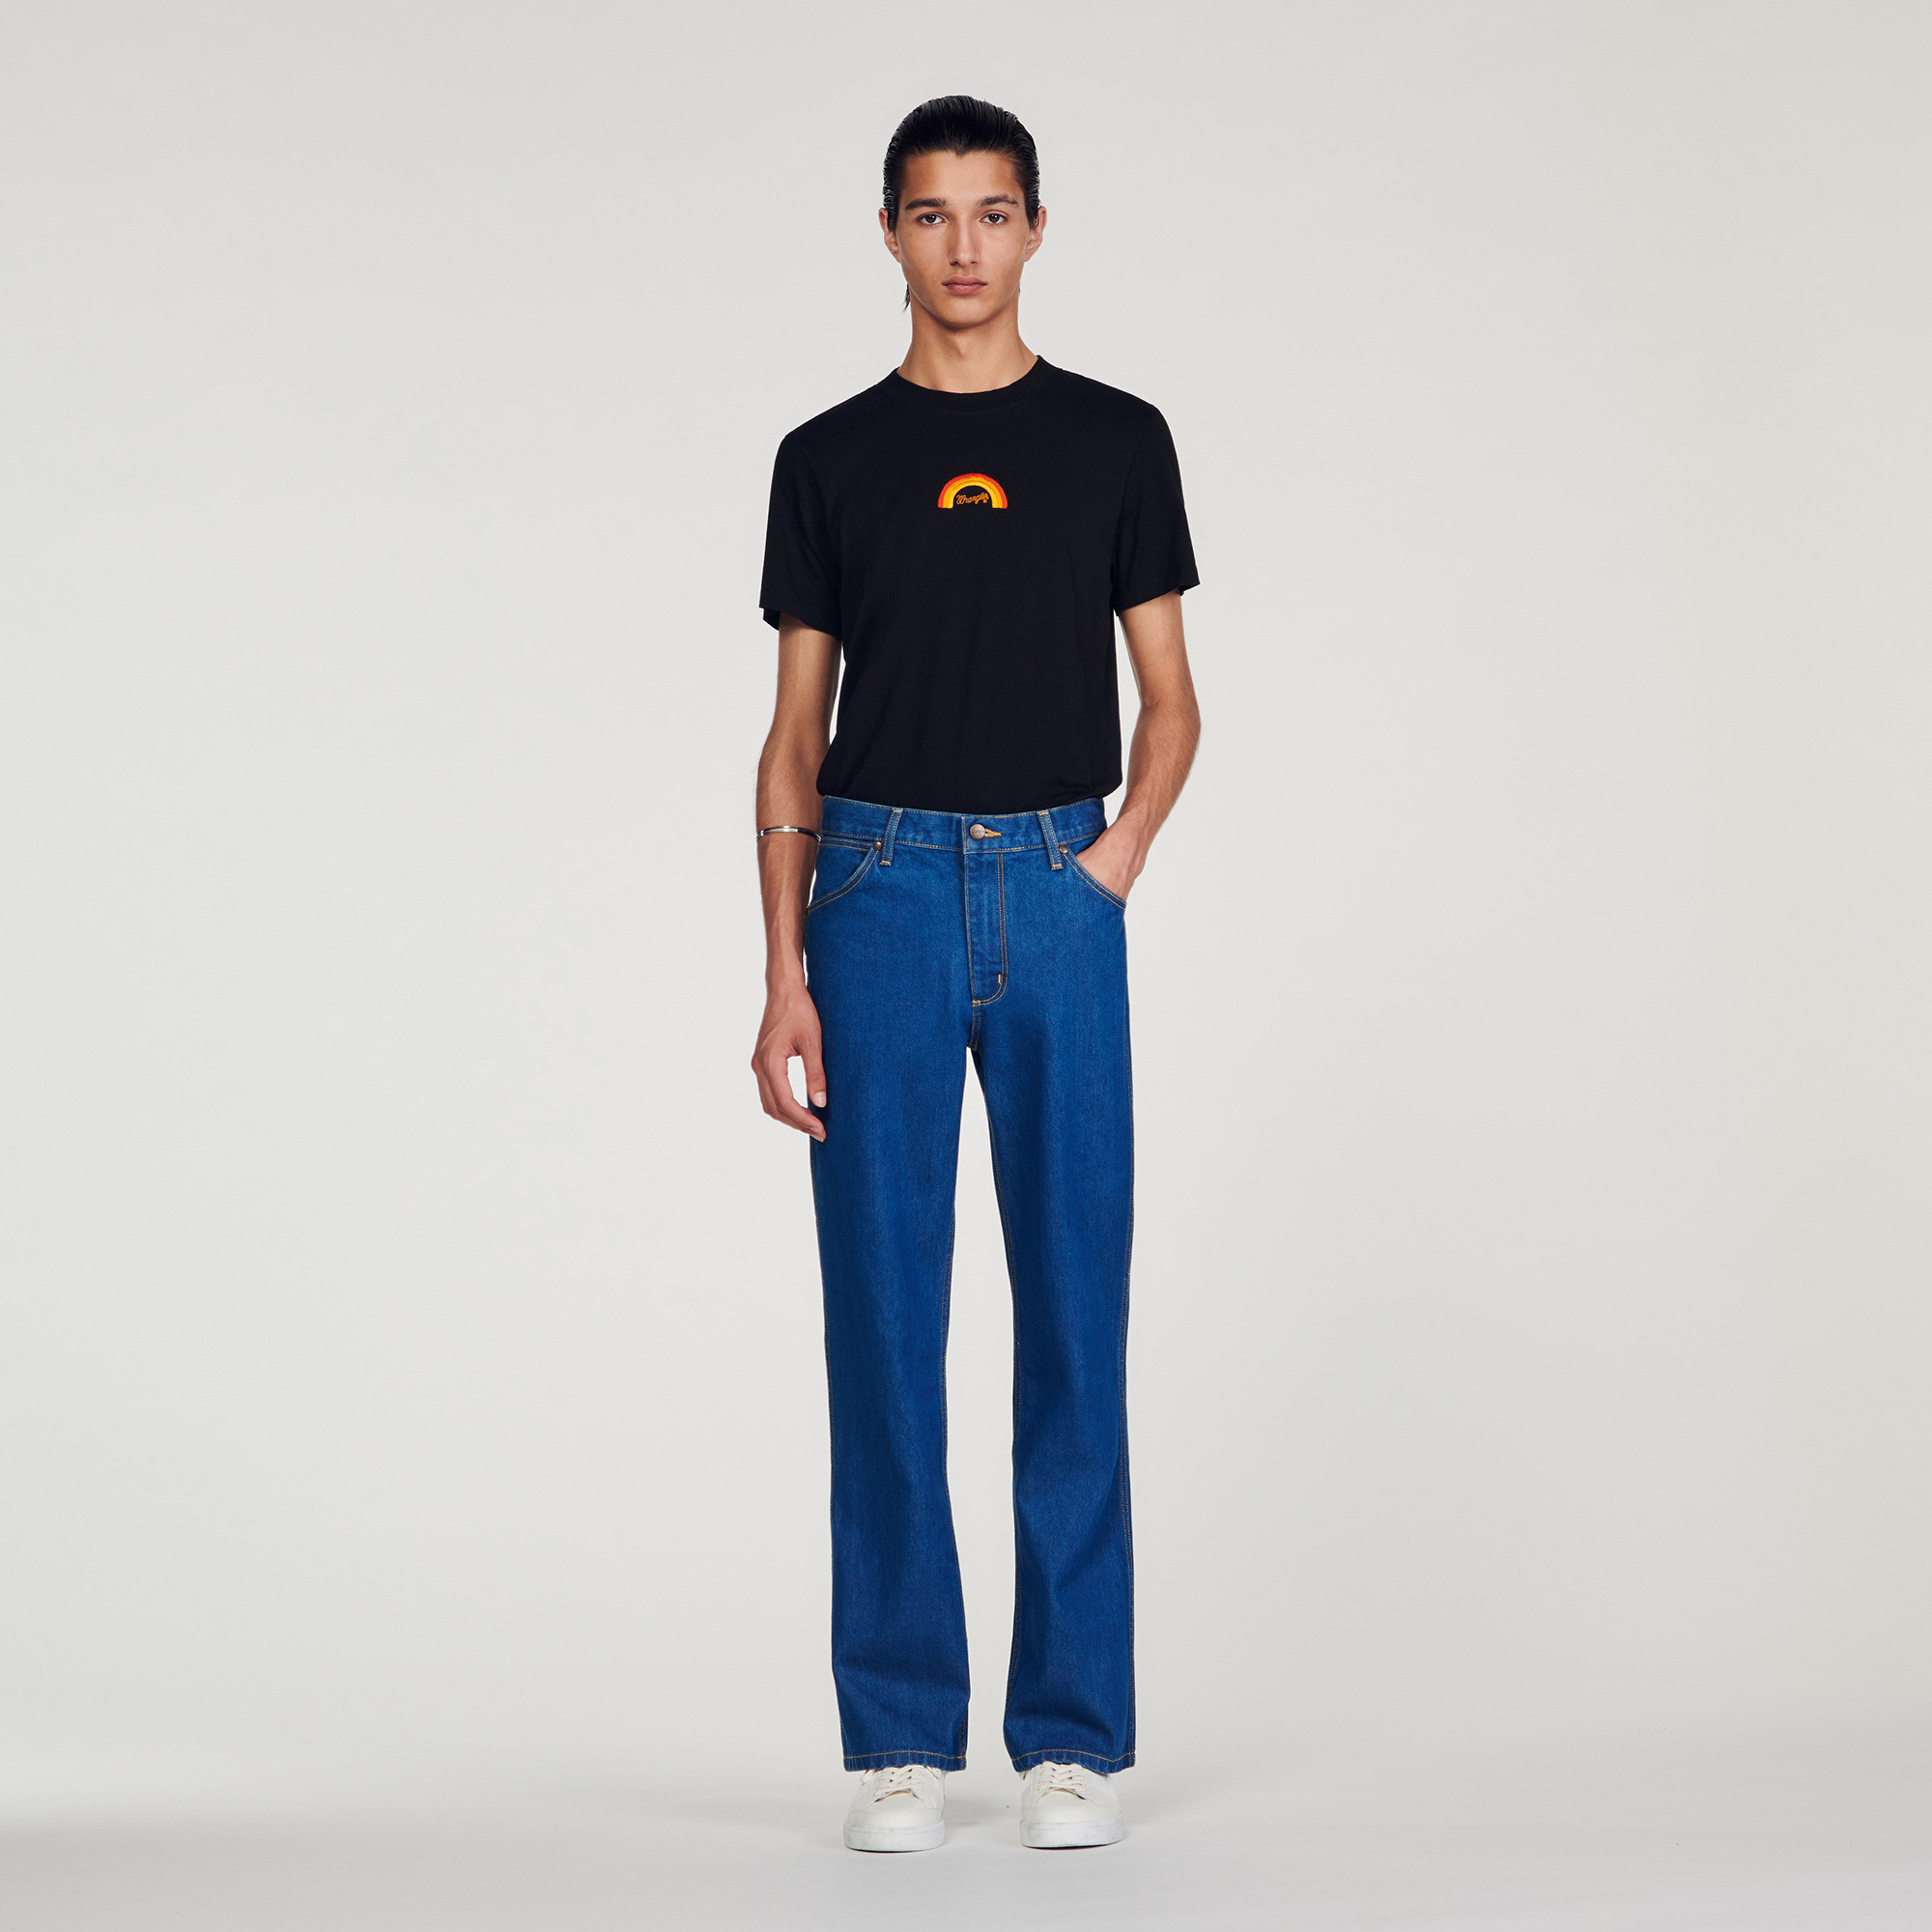 Sandro cotton Pocket lining: Designed by the Sandro Men's design studio, the capsule collection designed with Wrangler is versatile for both men and women